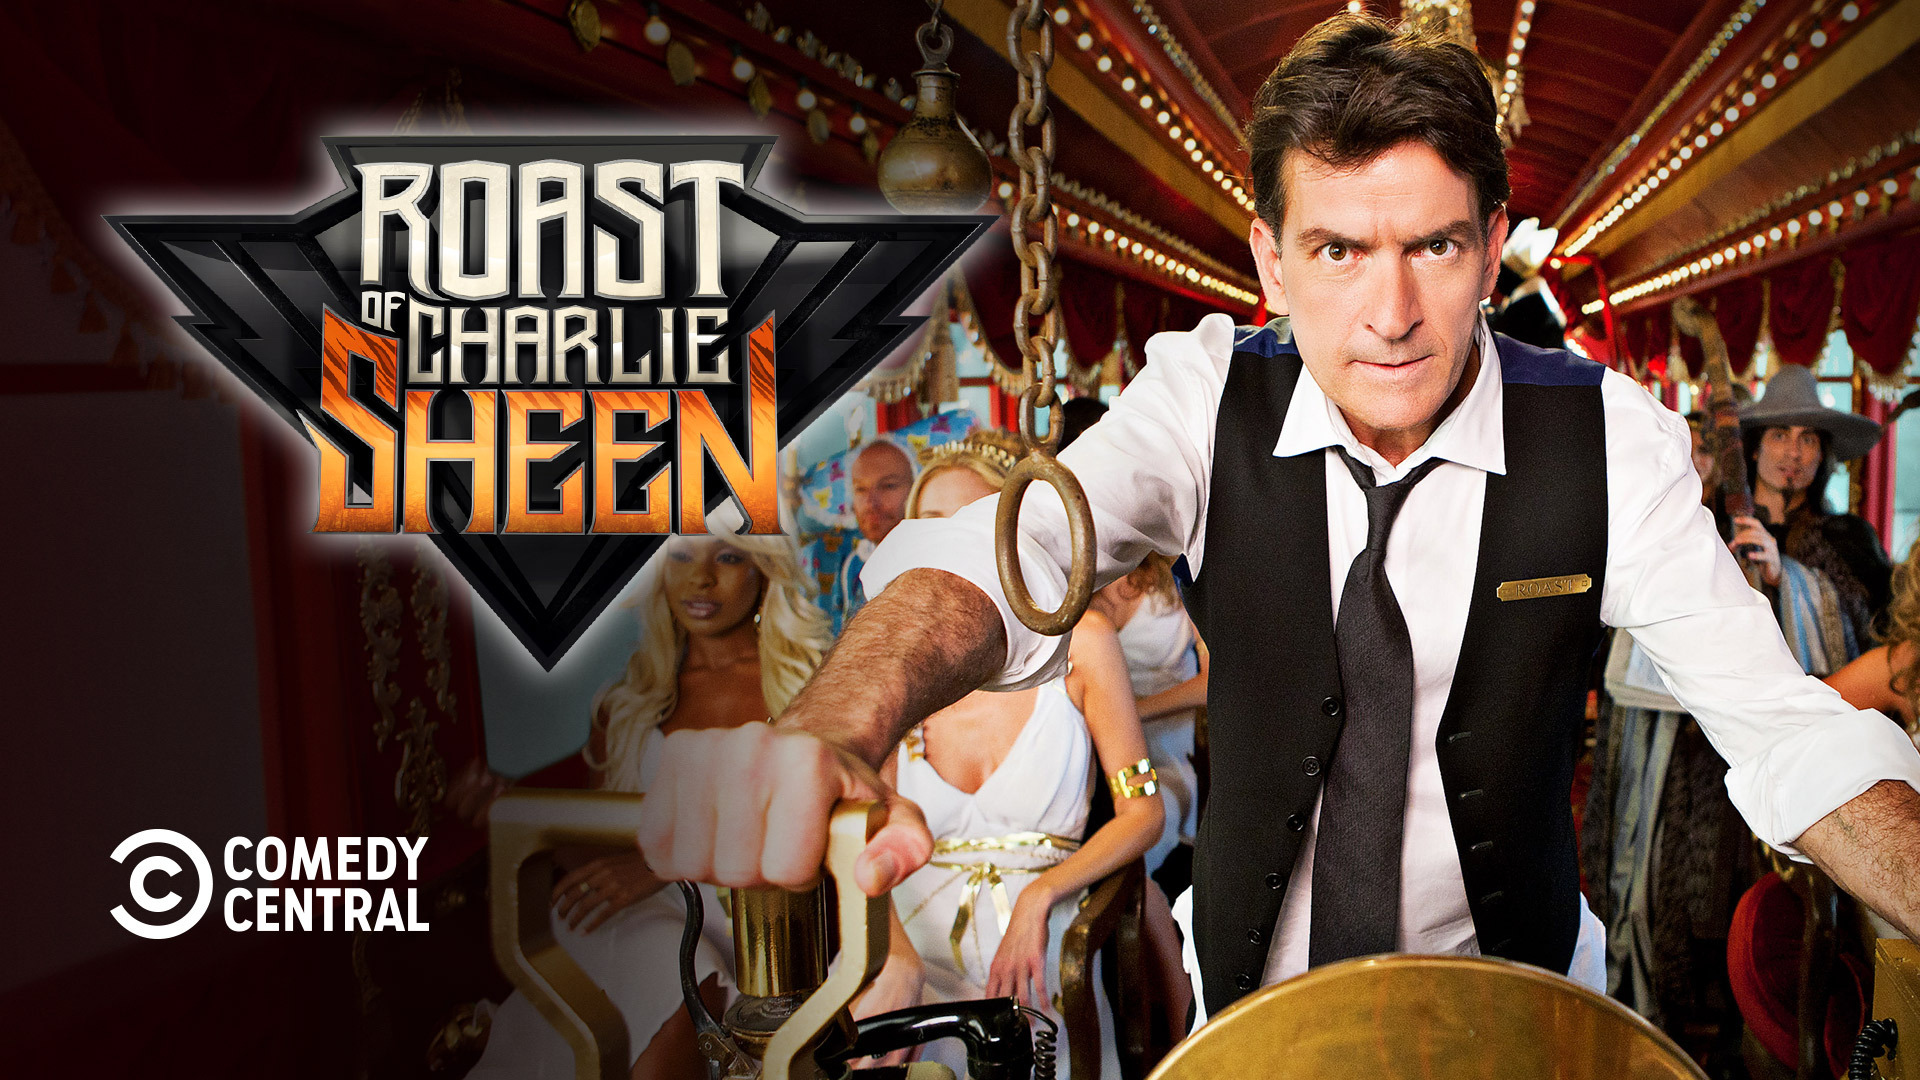 The Comedy Central Roast of Charlie Sheen Watch Movie on Paramount Plus